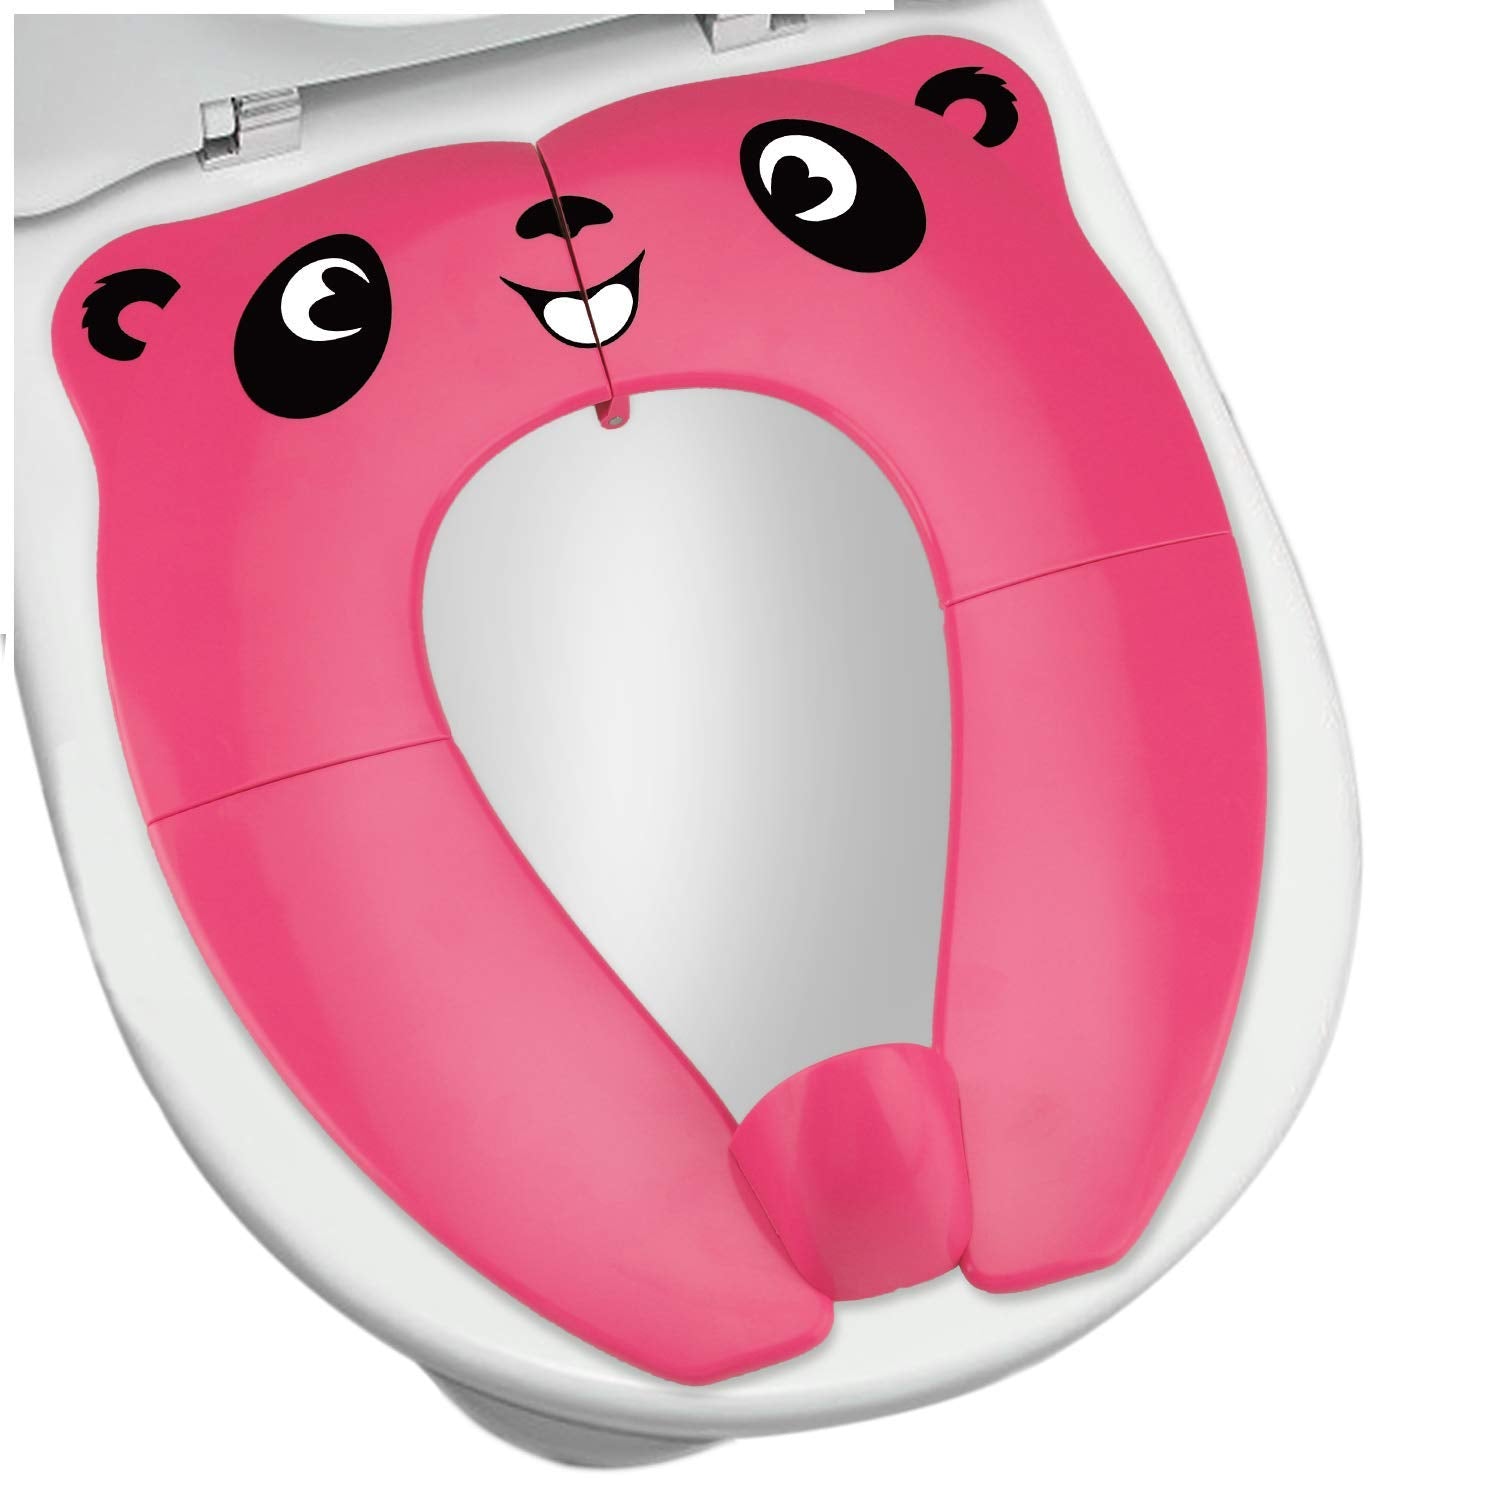 [Upgrade Version] Foldable Potty Seat - RIGHTWELL Travel Toilet Seat, Toilet Training Seat Portable Toilet Seat Toddler PP Material with Carry Bag (B, Pink)